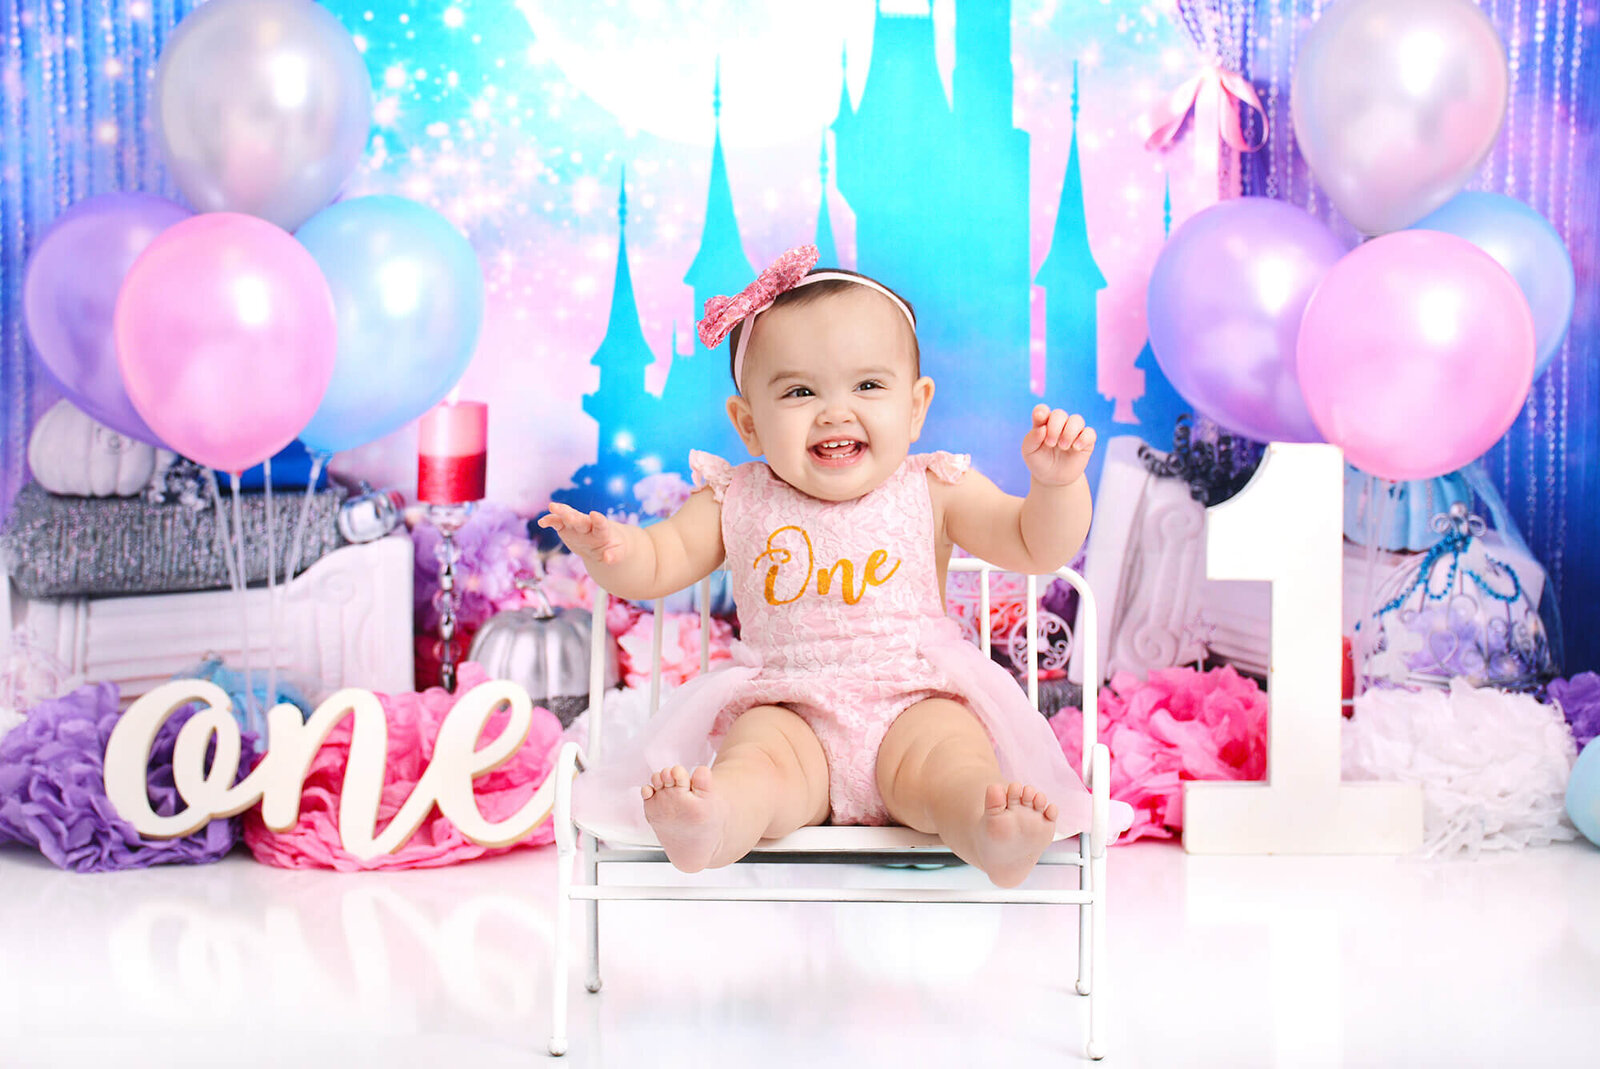 girl wearing a pink ONE romper smiles at her first birthday session